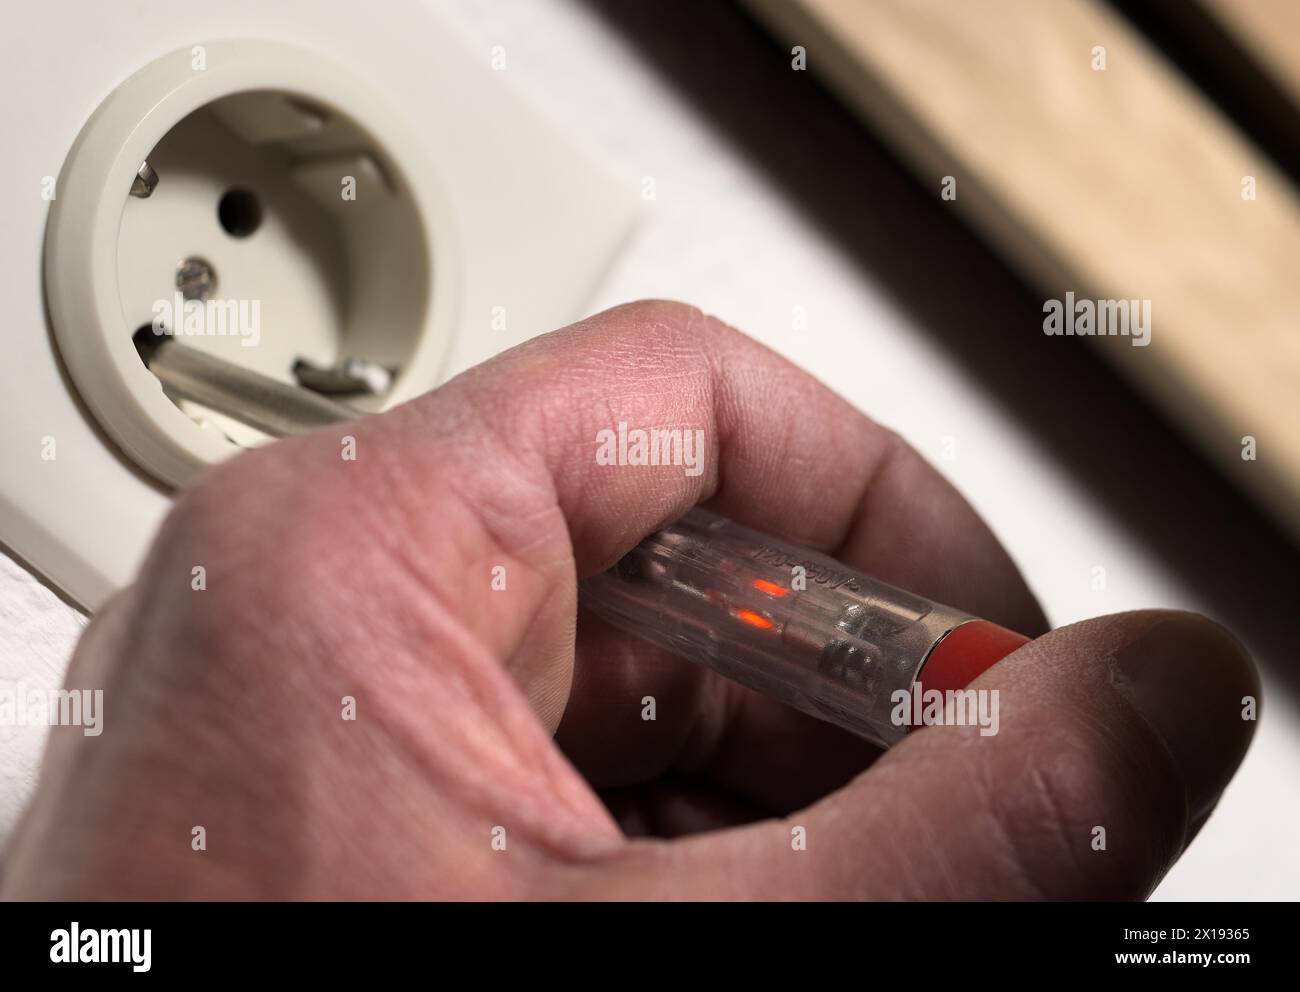 Checking mains grid voltage on wall power outlet socket with electrical circuit phase tester screwdriver Stock Photo